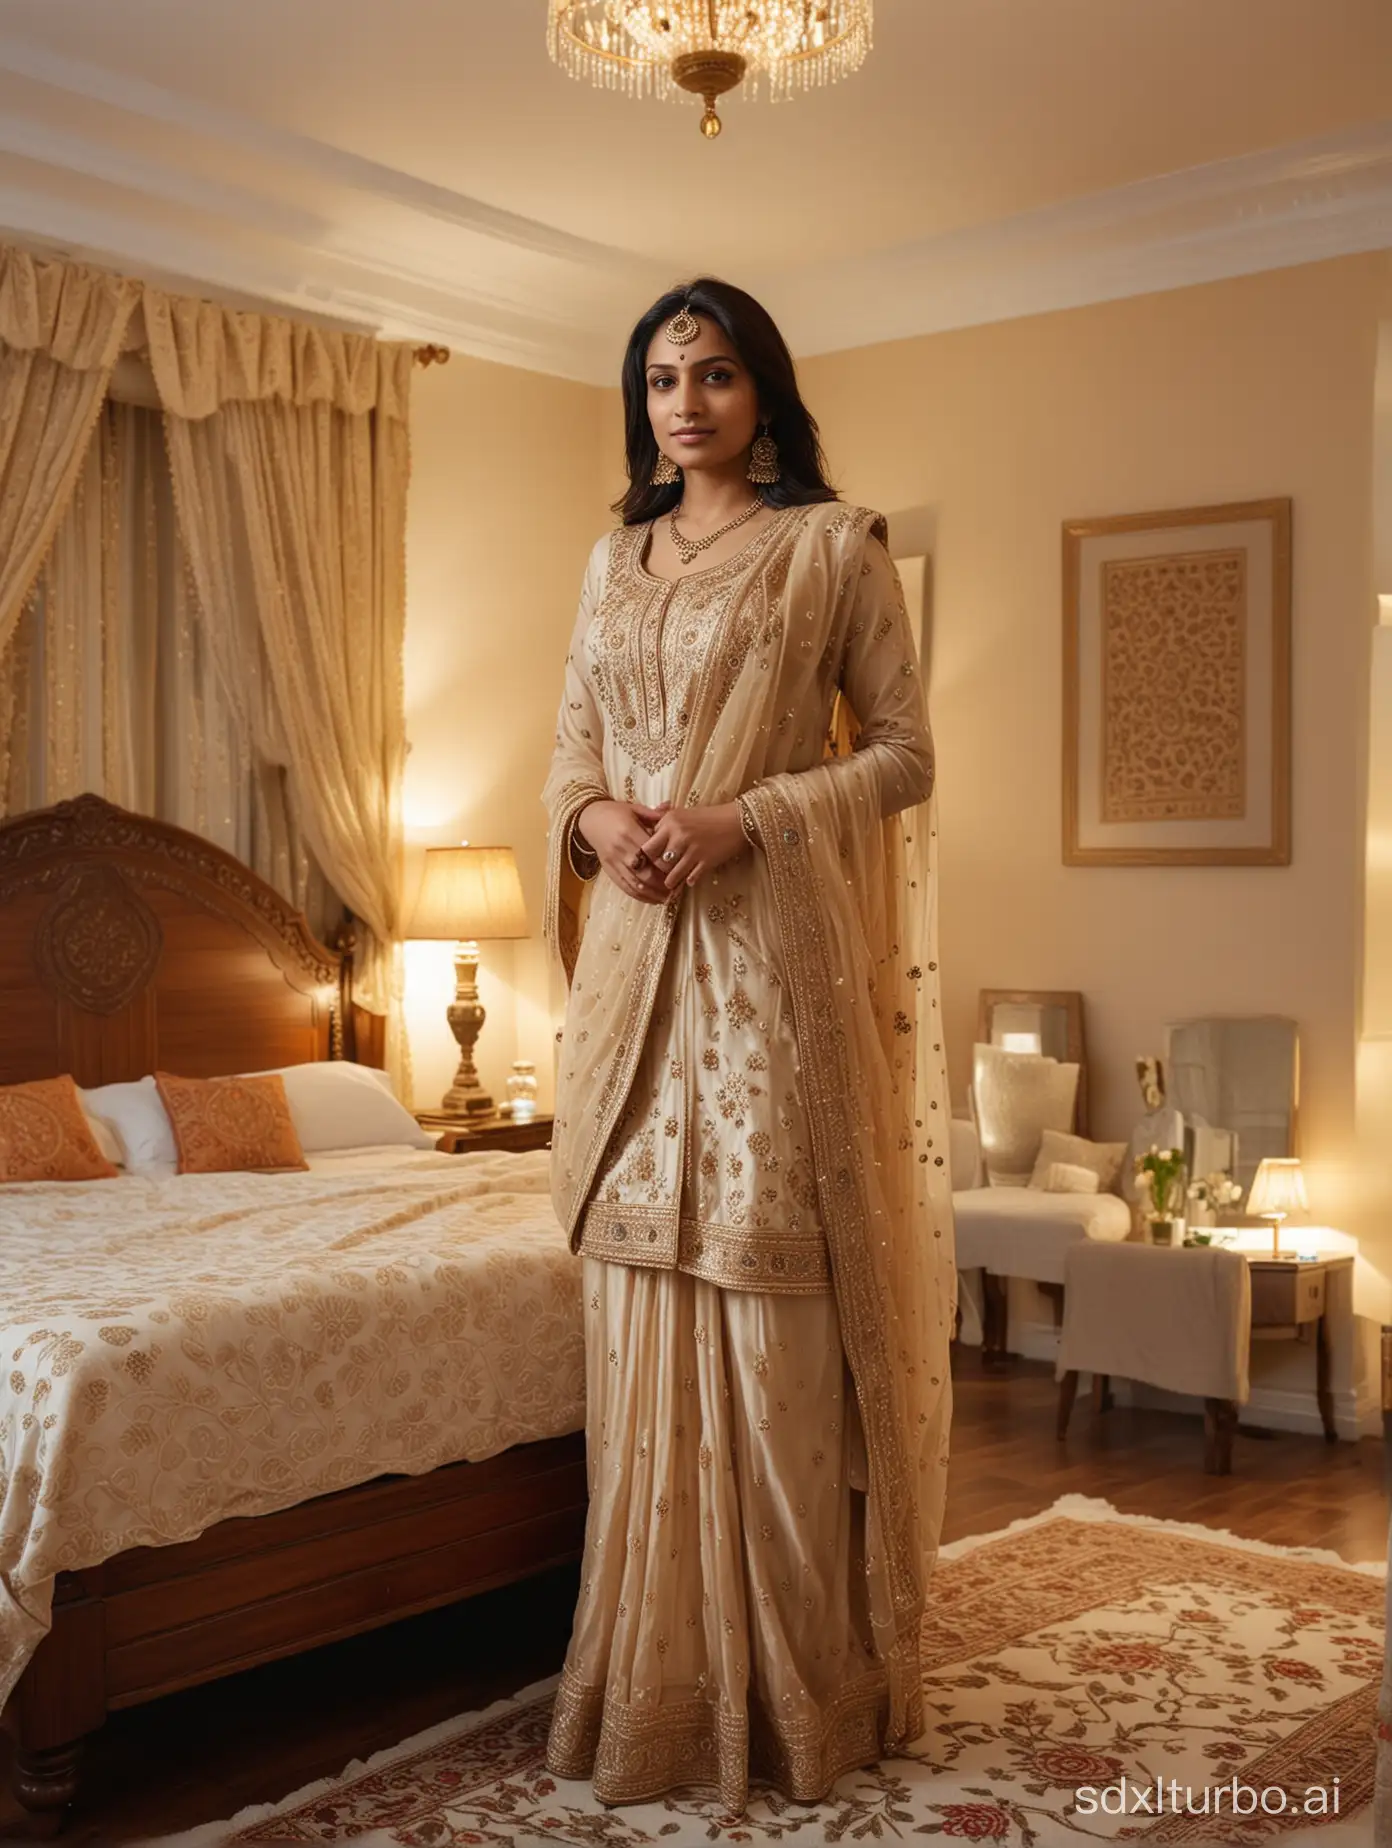 Indian woman in neutral embroidered party wear standing in her bedroom which is furnished in traditional Indian style, room brightly lit, emulate Nikon D6 shot, wide angle shot, soft warm lighting, photorealistic